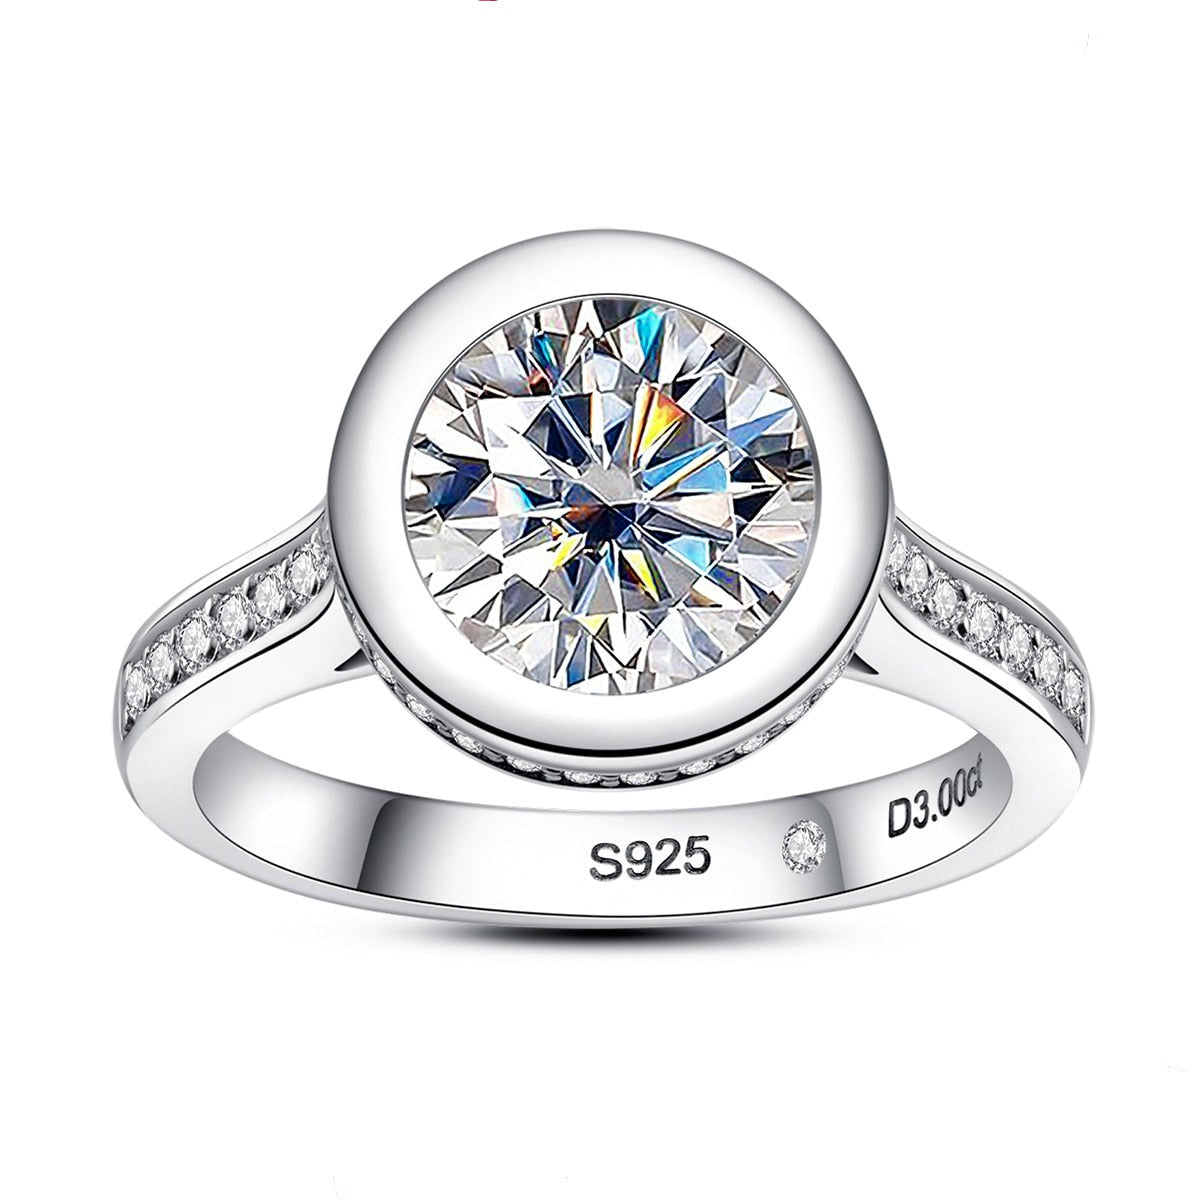 A 3CT moissanite, bezel set in a floating setting on a pave band.